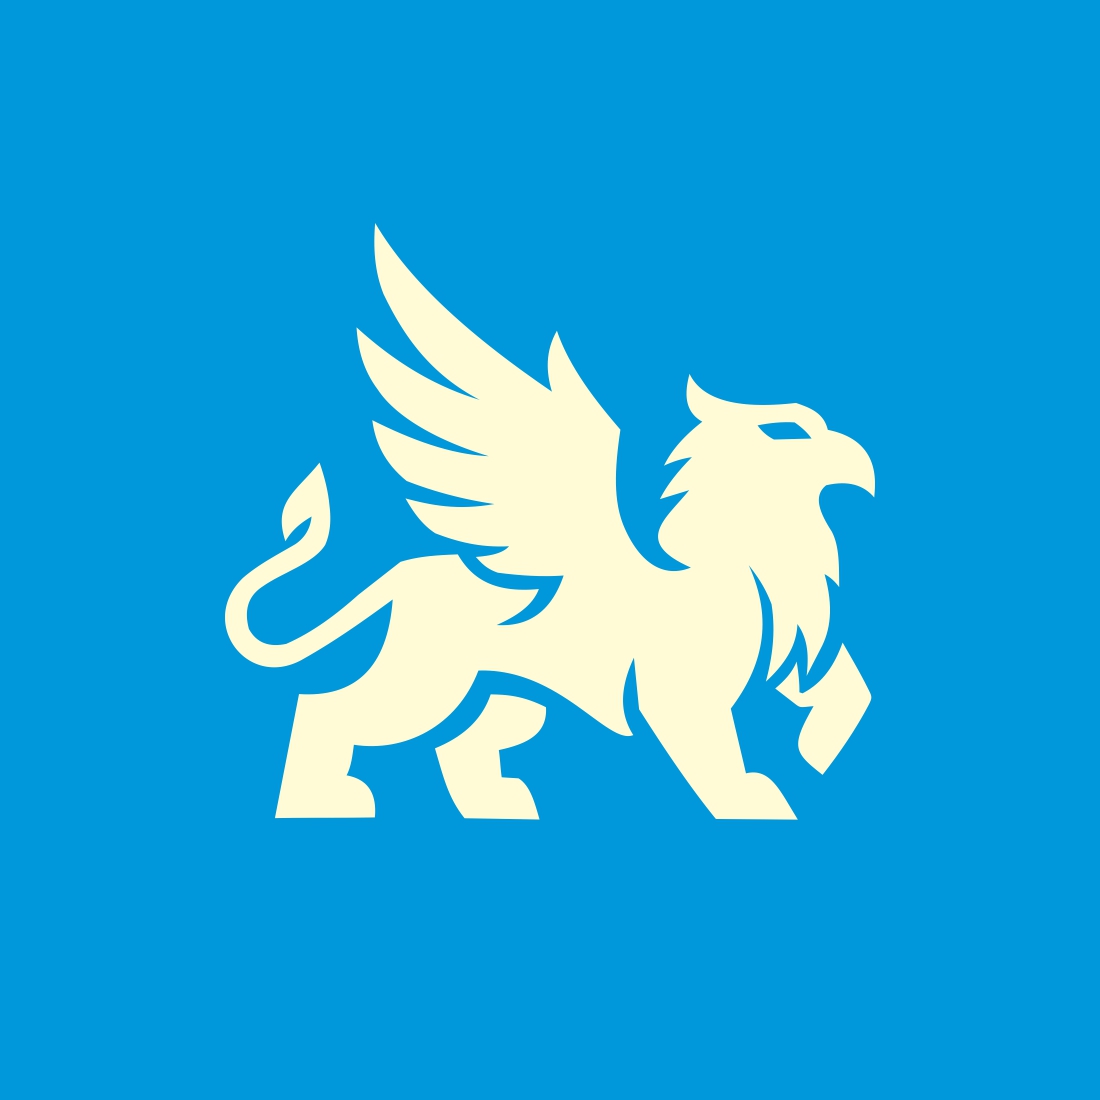 gryphon financial griffin logo3 303